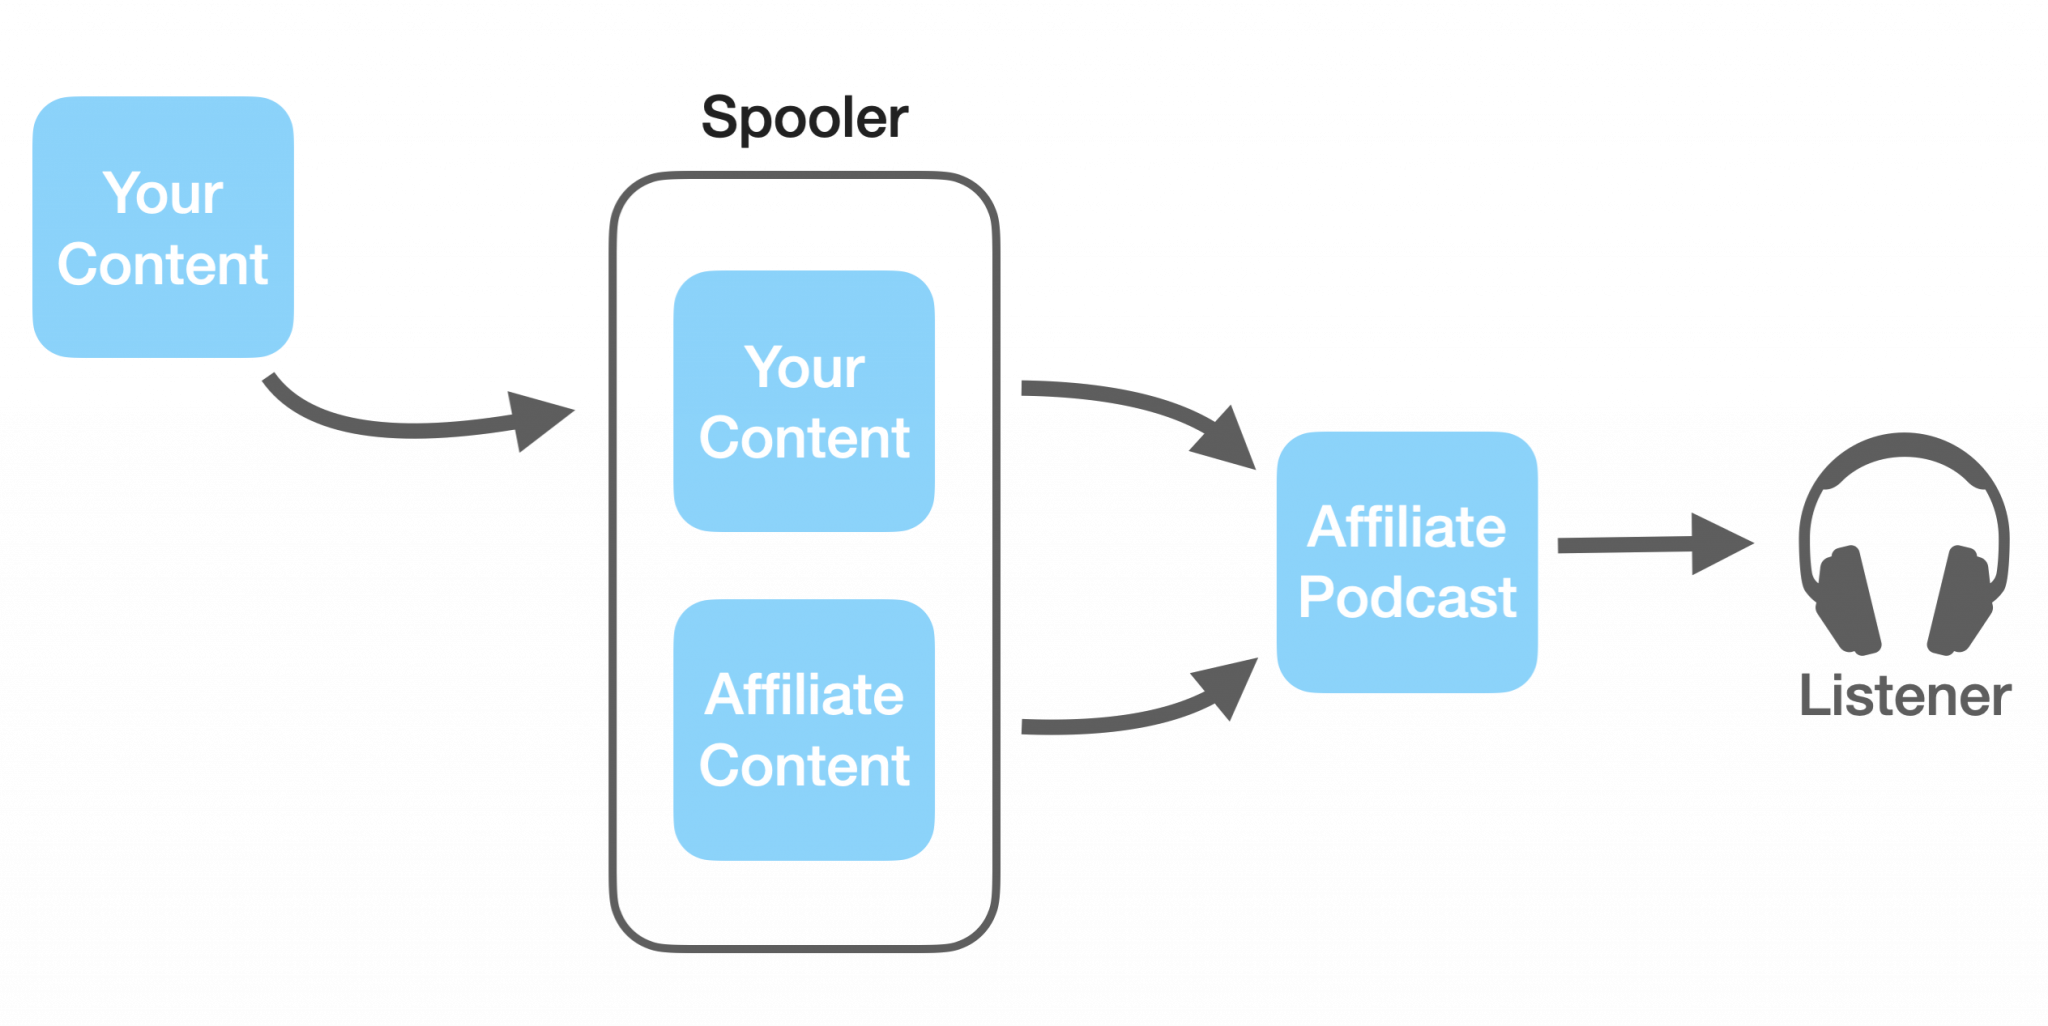 Diagram which shows partner content, ingested into Spooler, can be combined with local content to create blended shows.